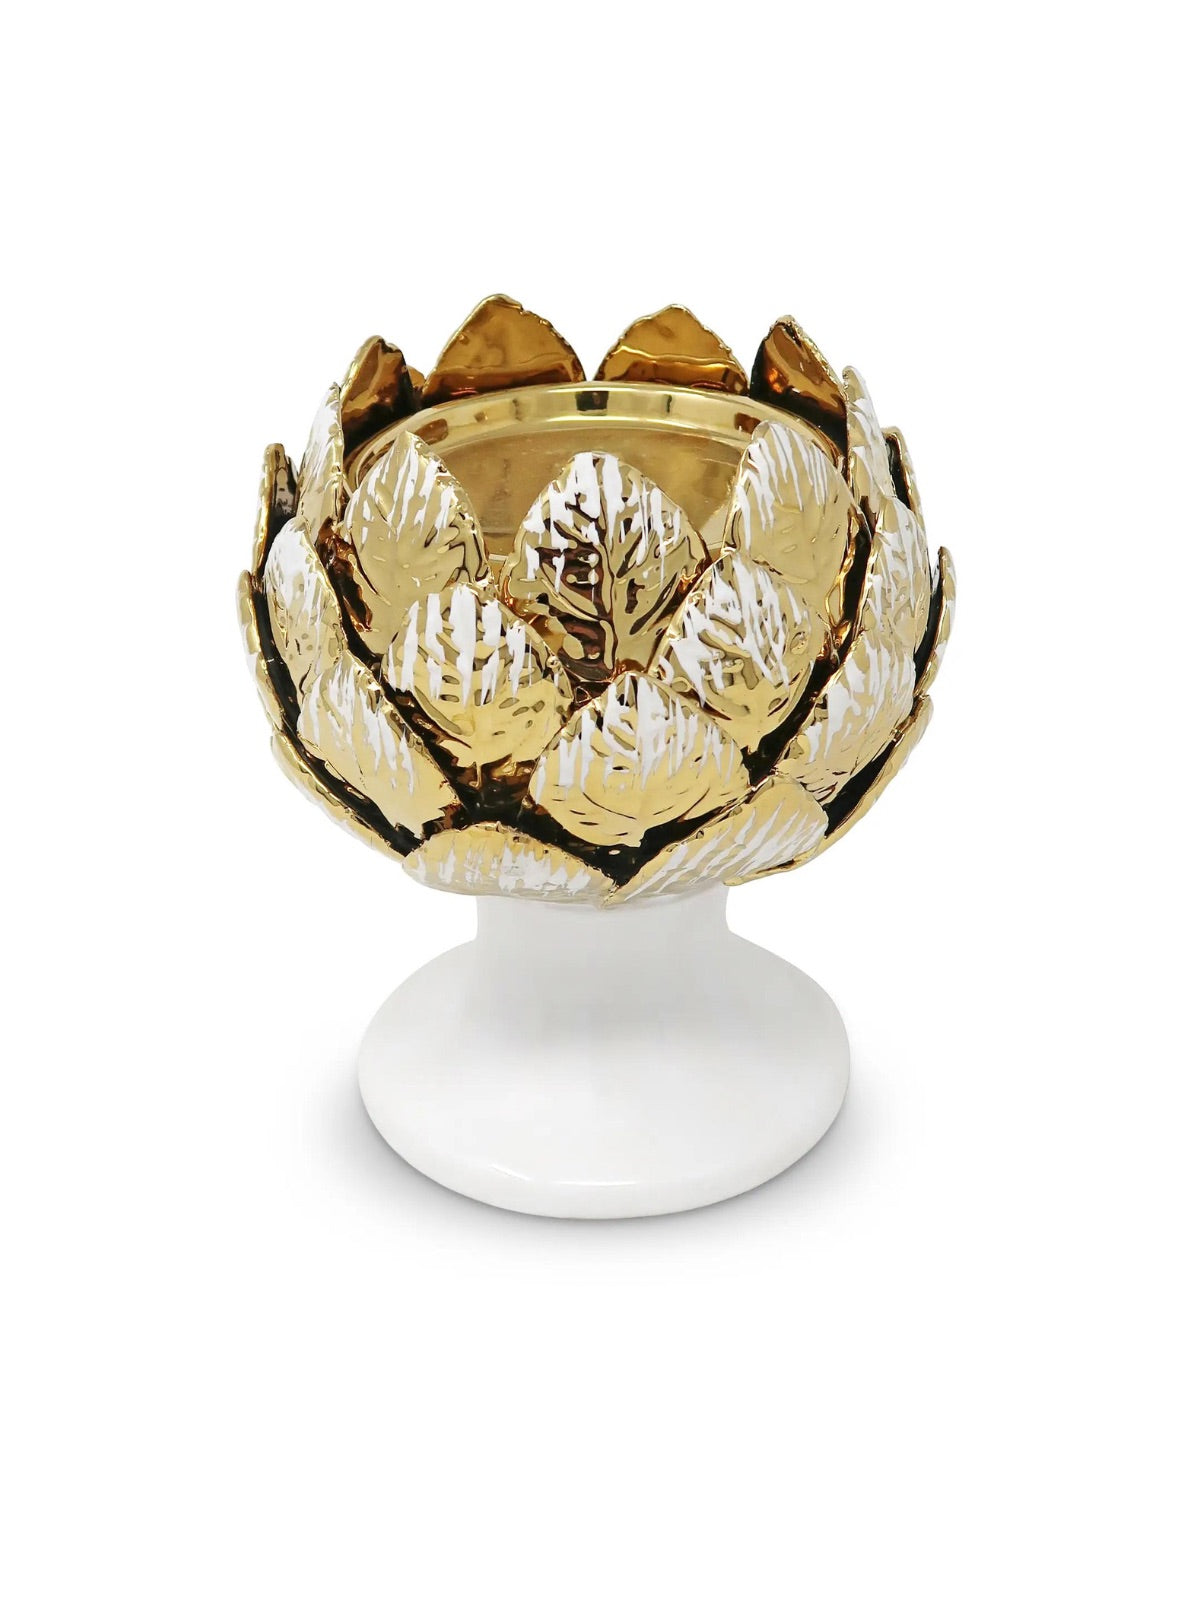 Tealight Holder with White and Gold Leaf Design